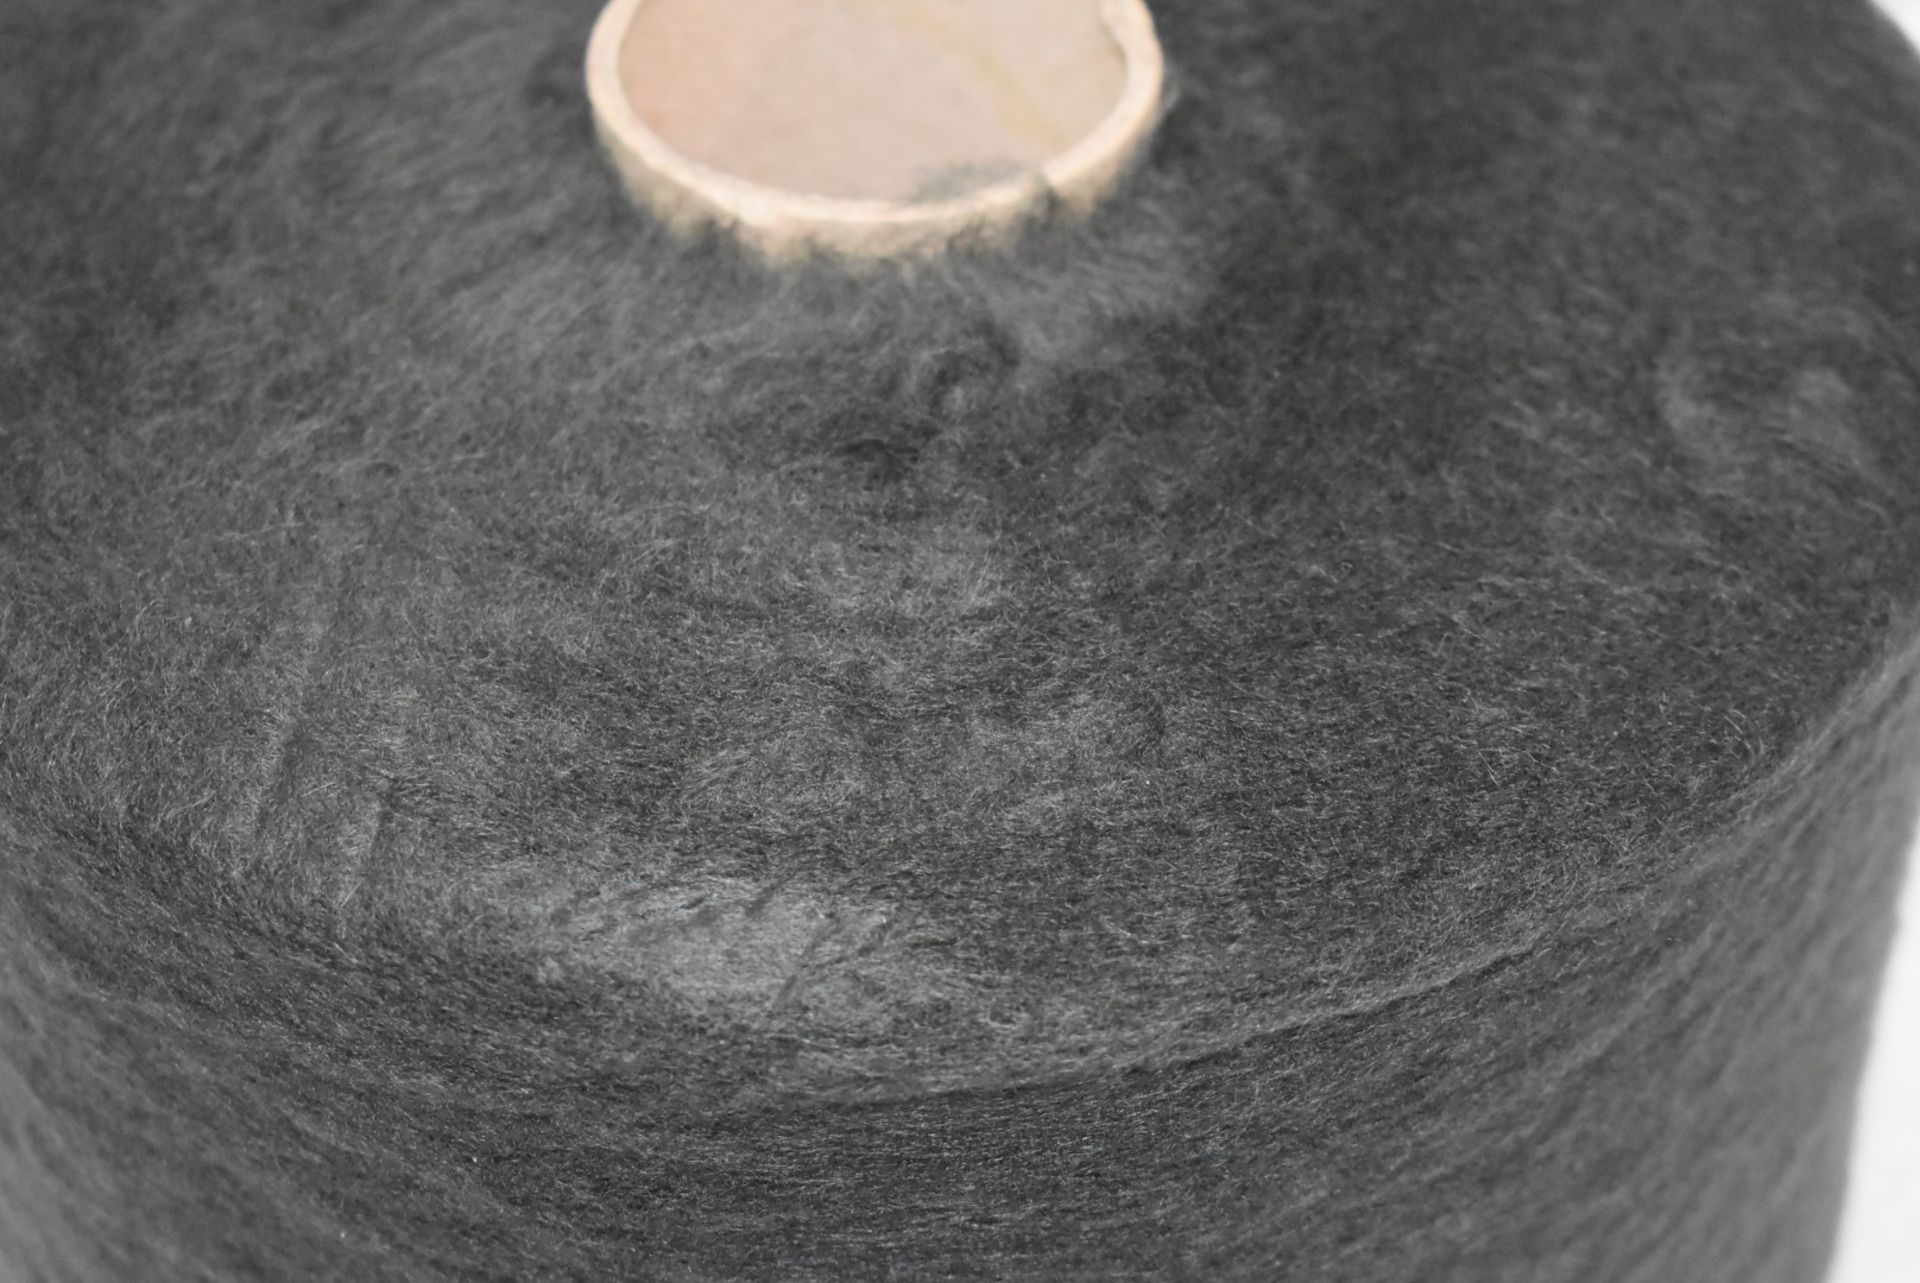 36 x Cones of 1/7,5 Lagona Knitting Yarn - Charcoal - Approx Weight: 2,300g - New Stock ABL Yarn - Image 6 of 9